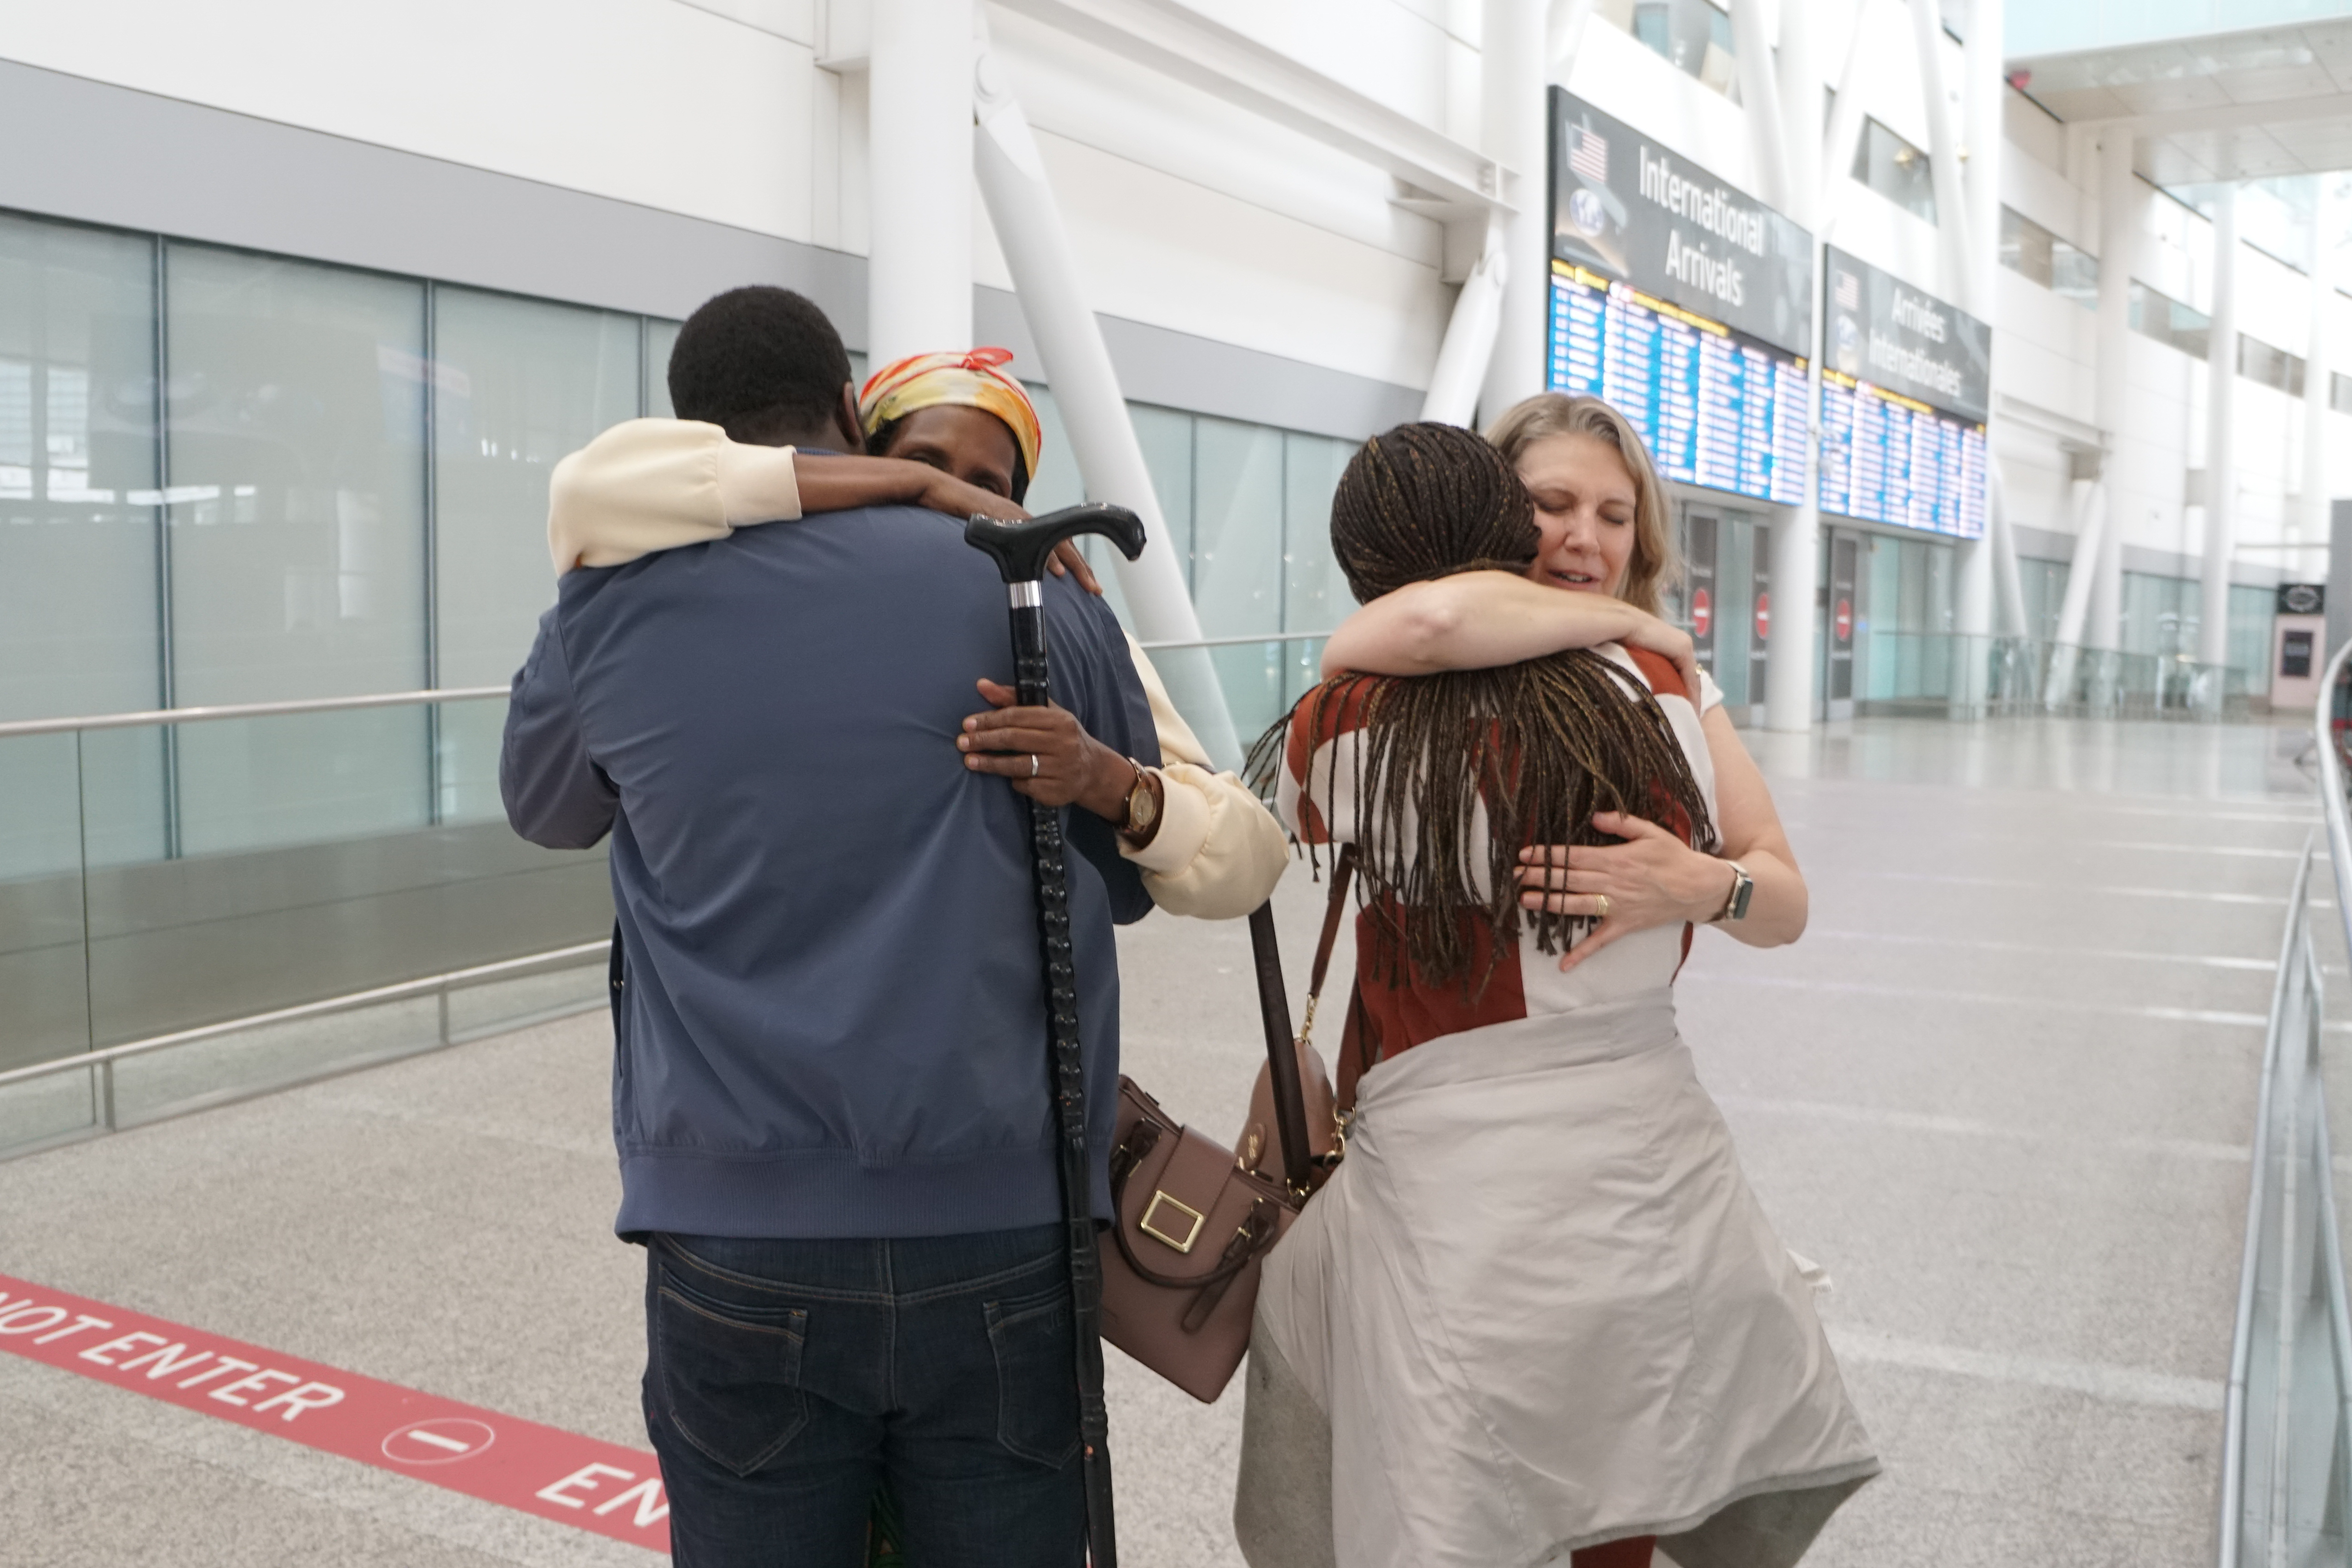 Two sets of people are embracing in an airport arrivals area.